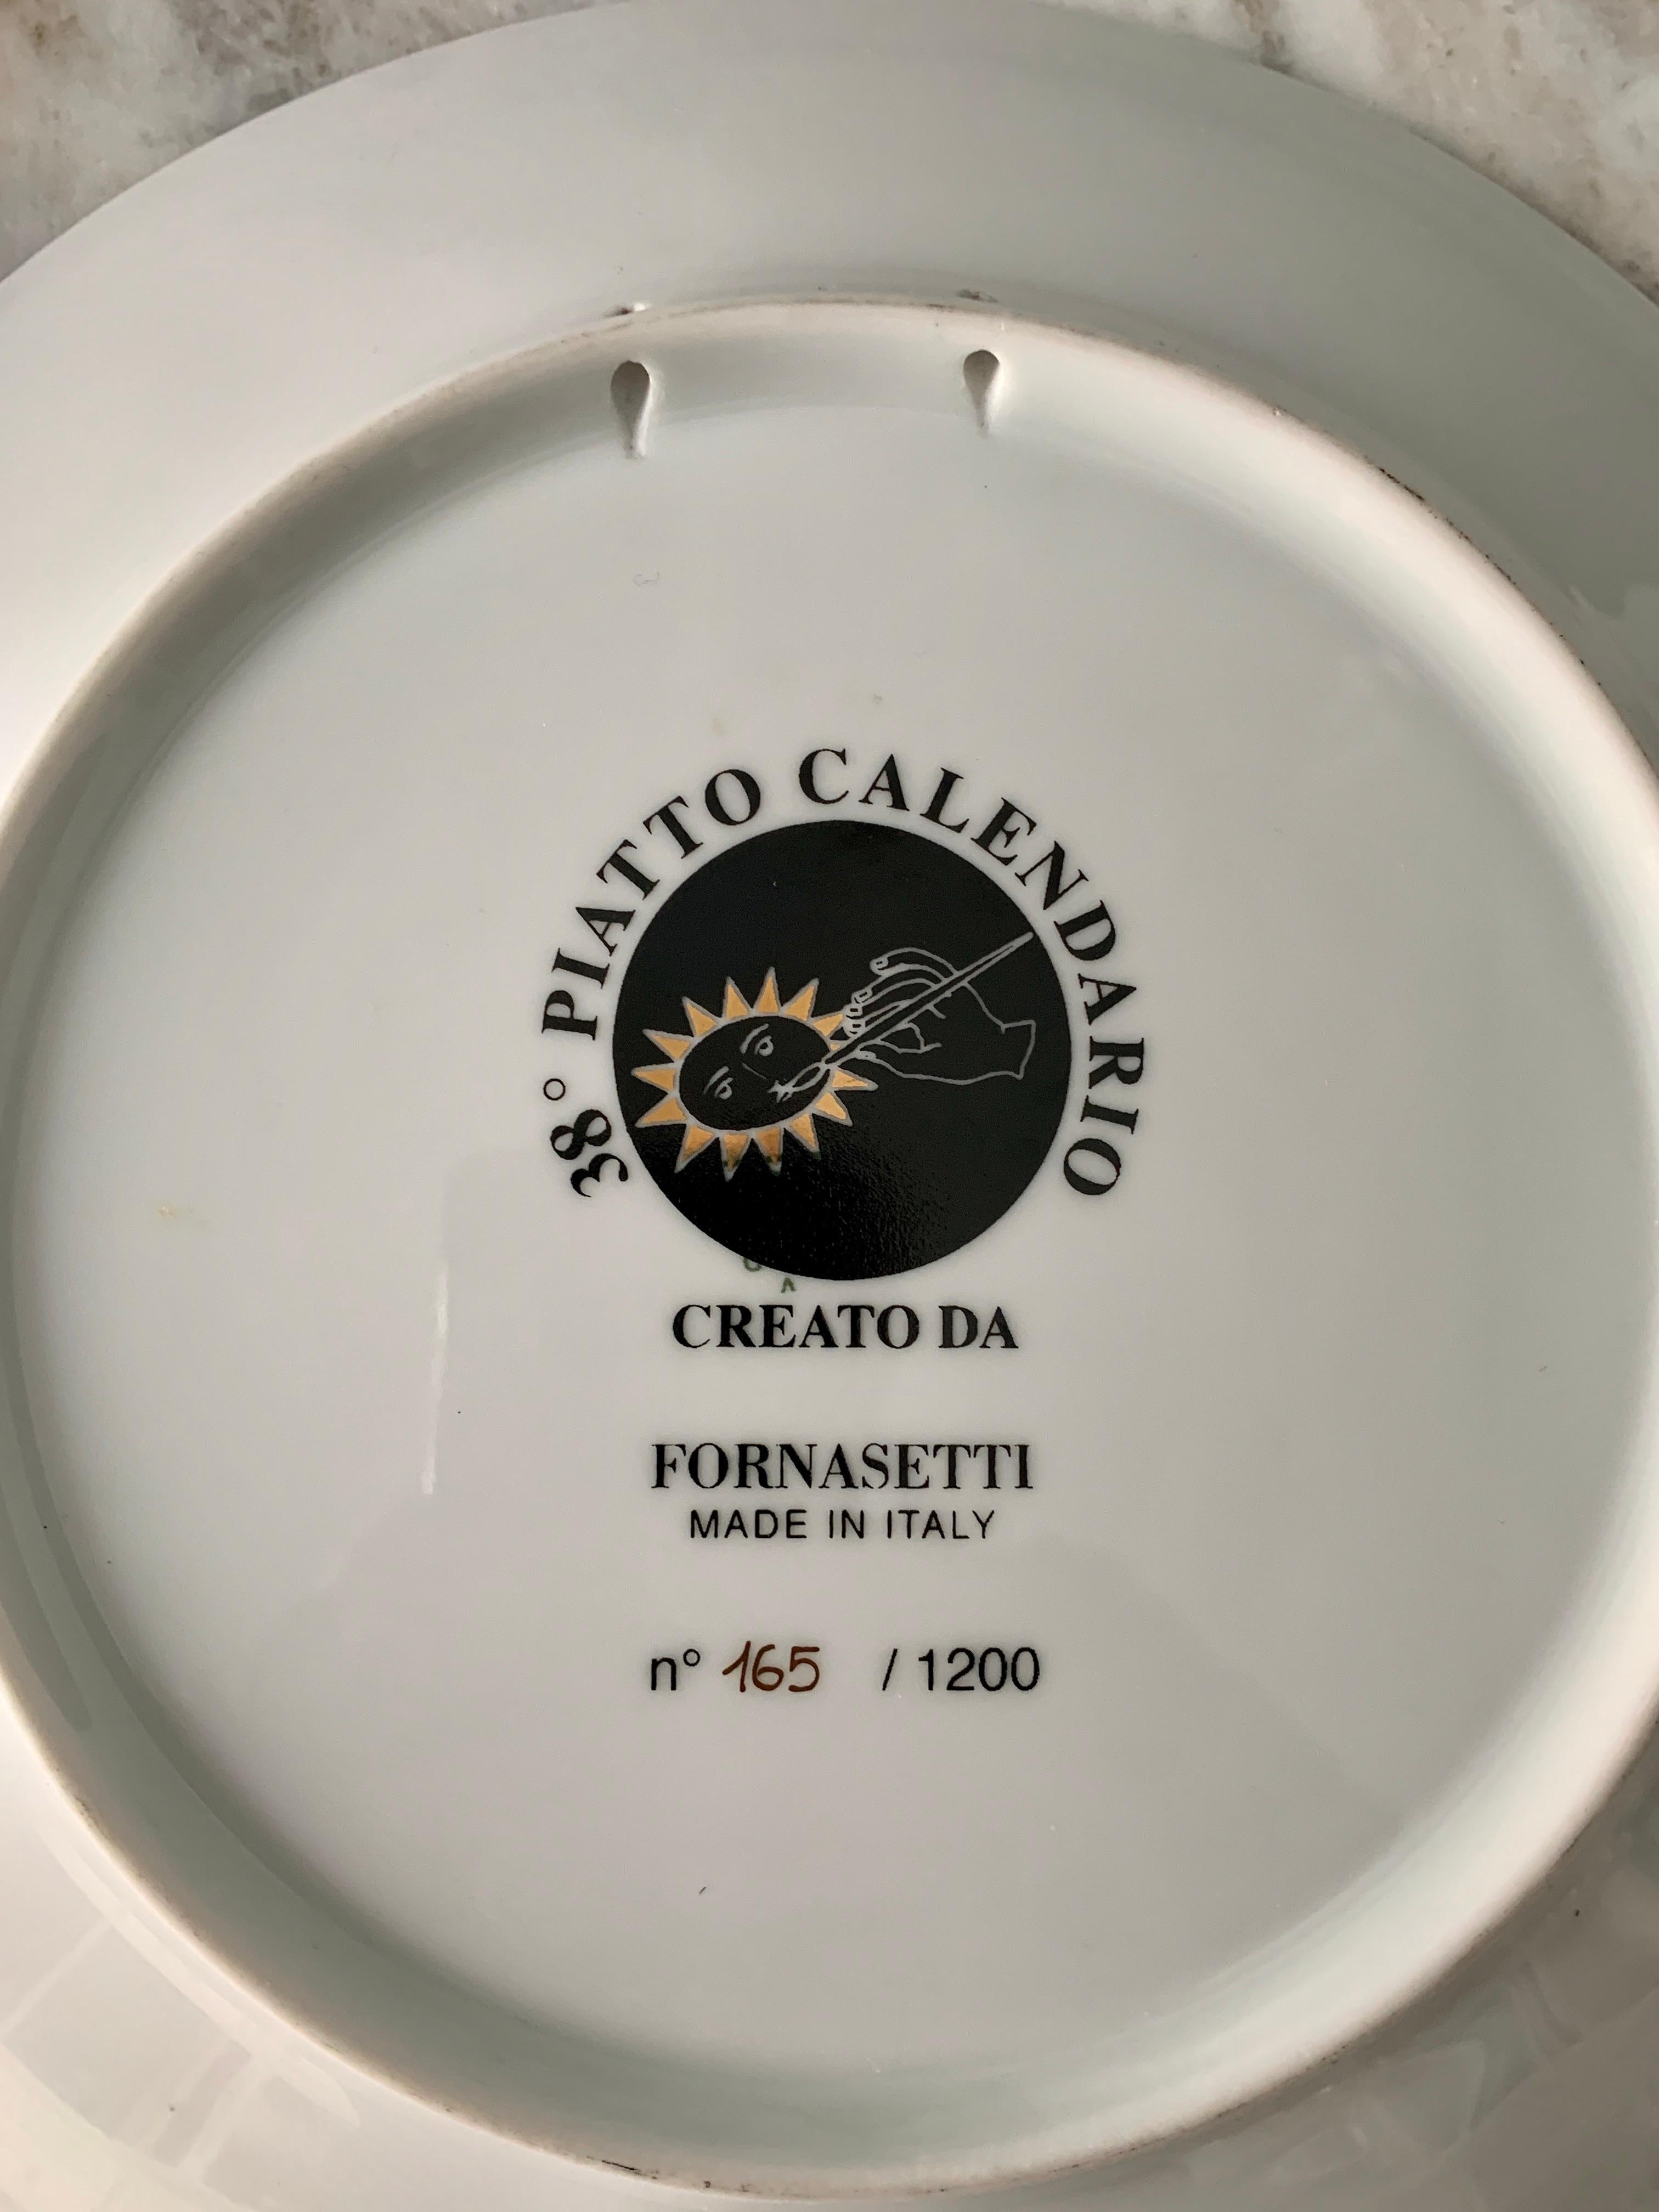 Contemporary 2 Plato Calendario Porcelain Plates signed and numbered Fornasetti from Italy For Sale